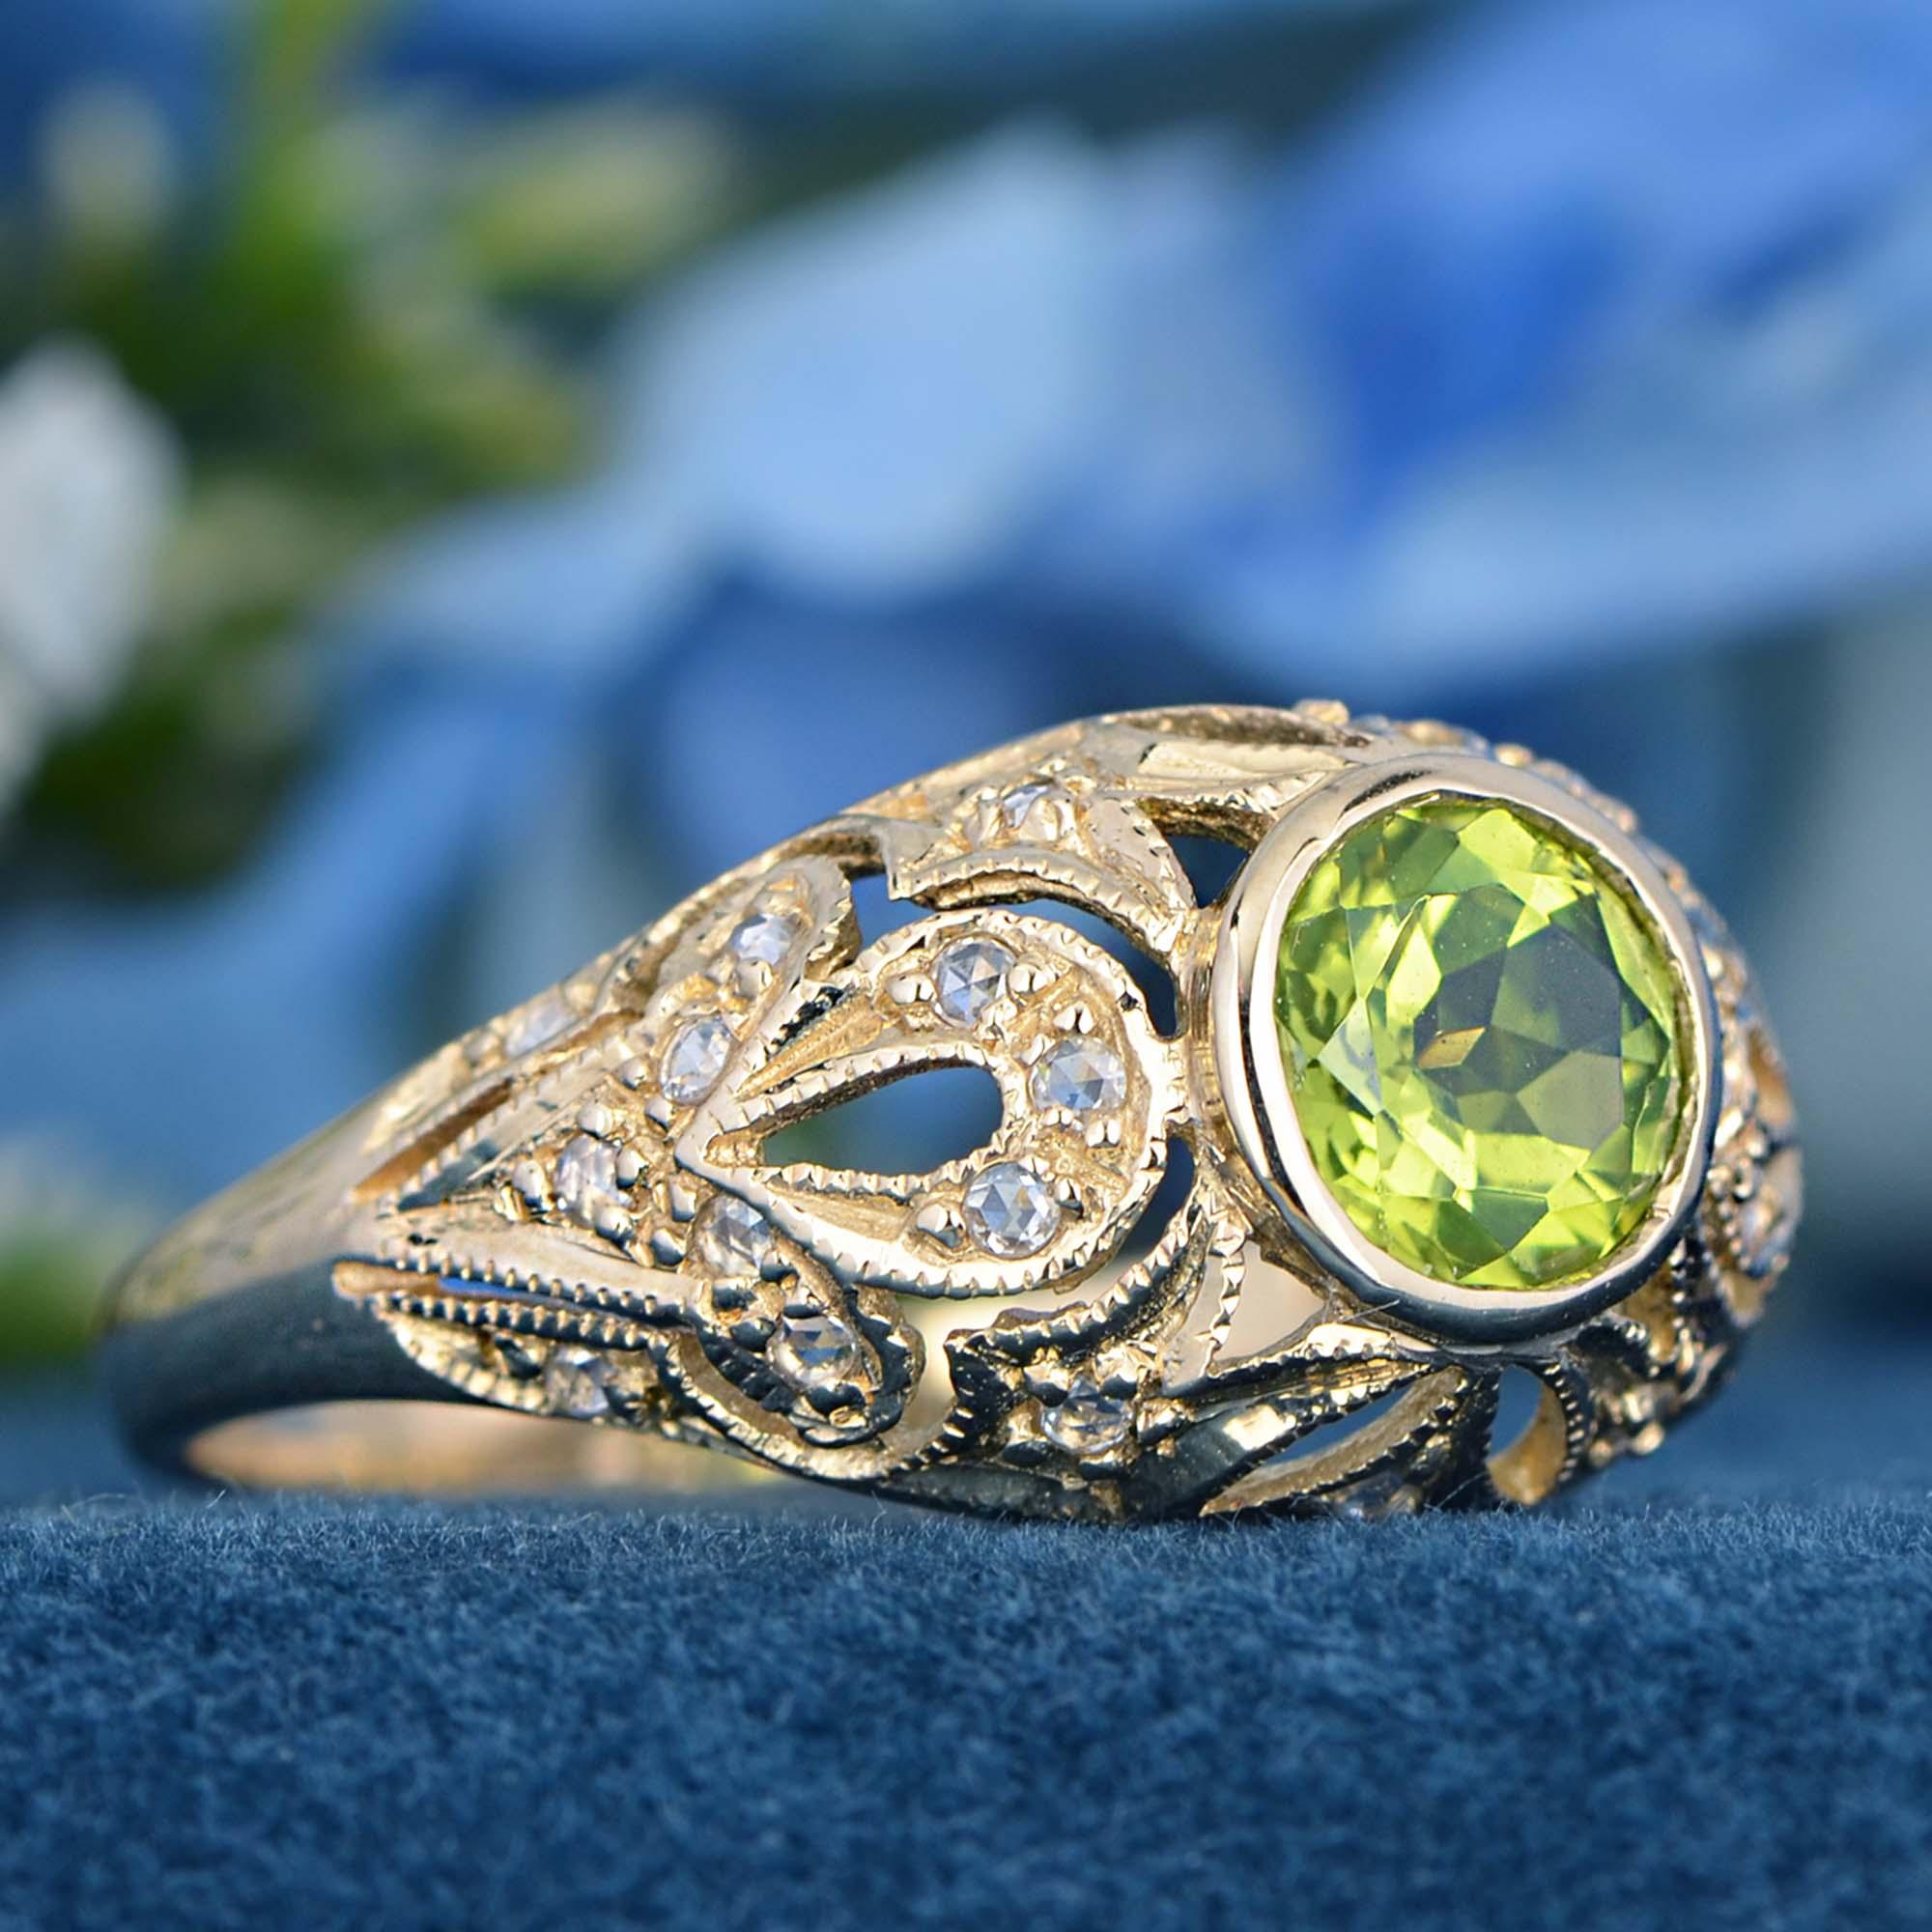 Add a delicate and unique aesthetic to your hand with this filigree ring by GEMMA FILIGREE. Our antique design gold filigree rings equate to delicacy and light openwork, while maintains strength for everyday wear for a lifetime.

This striking